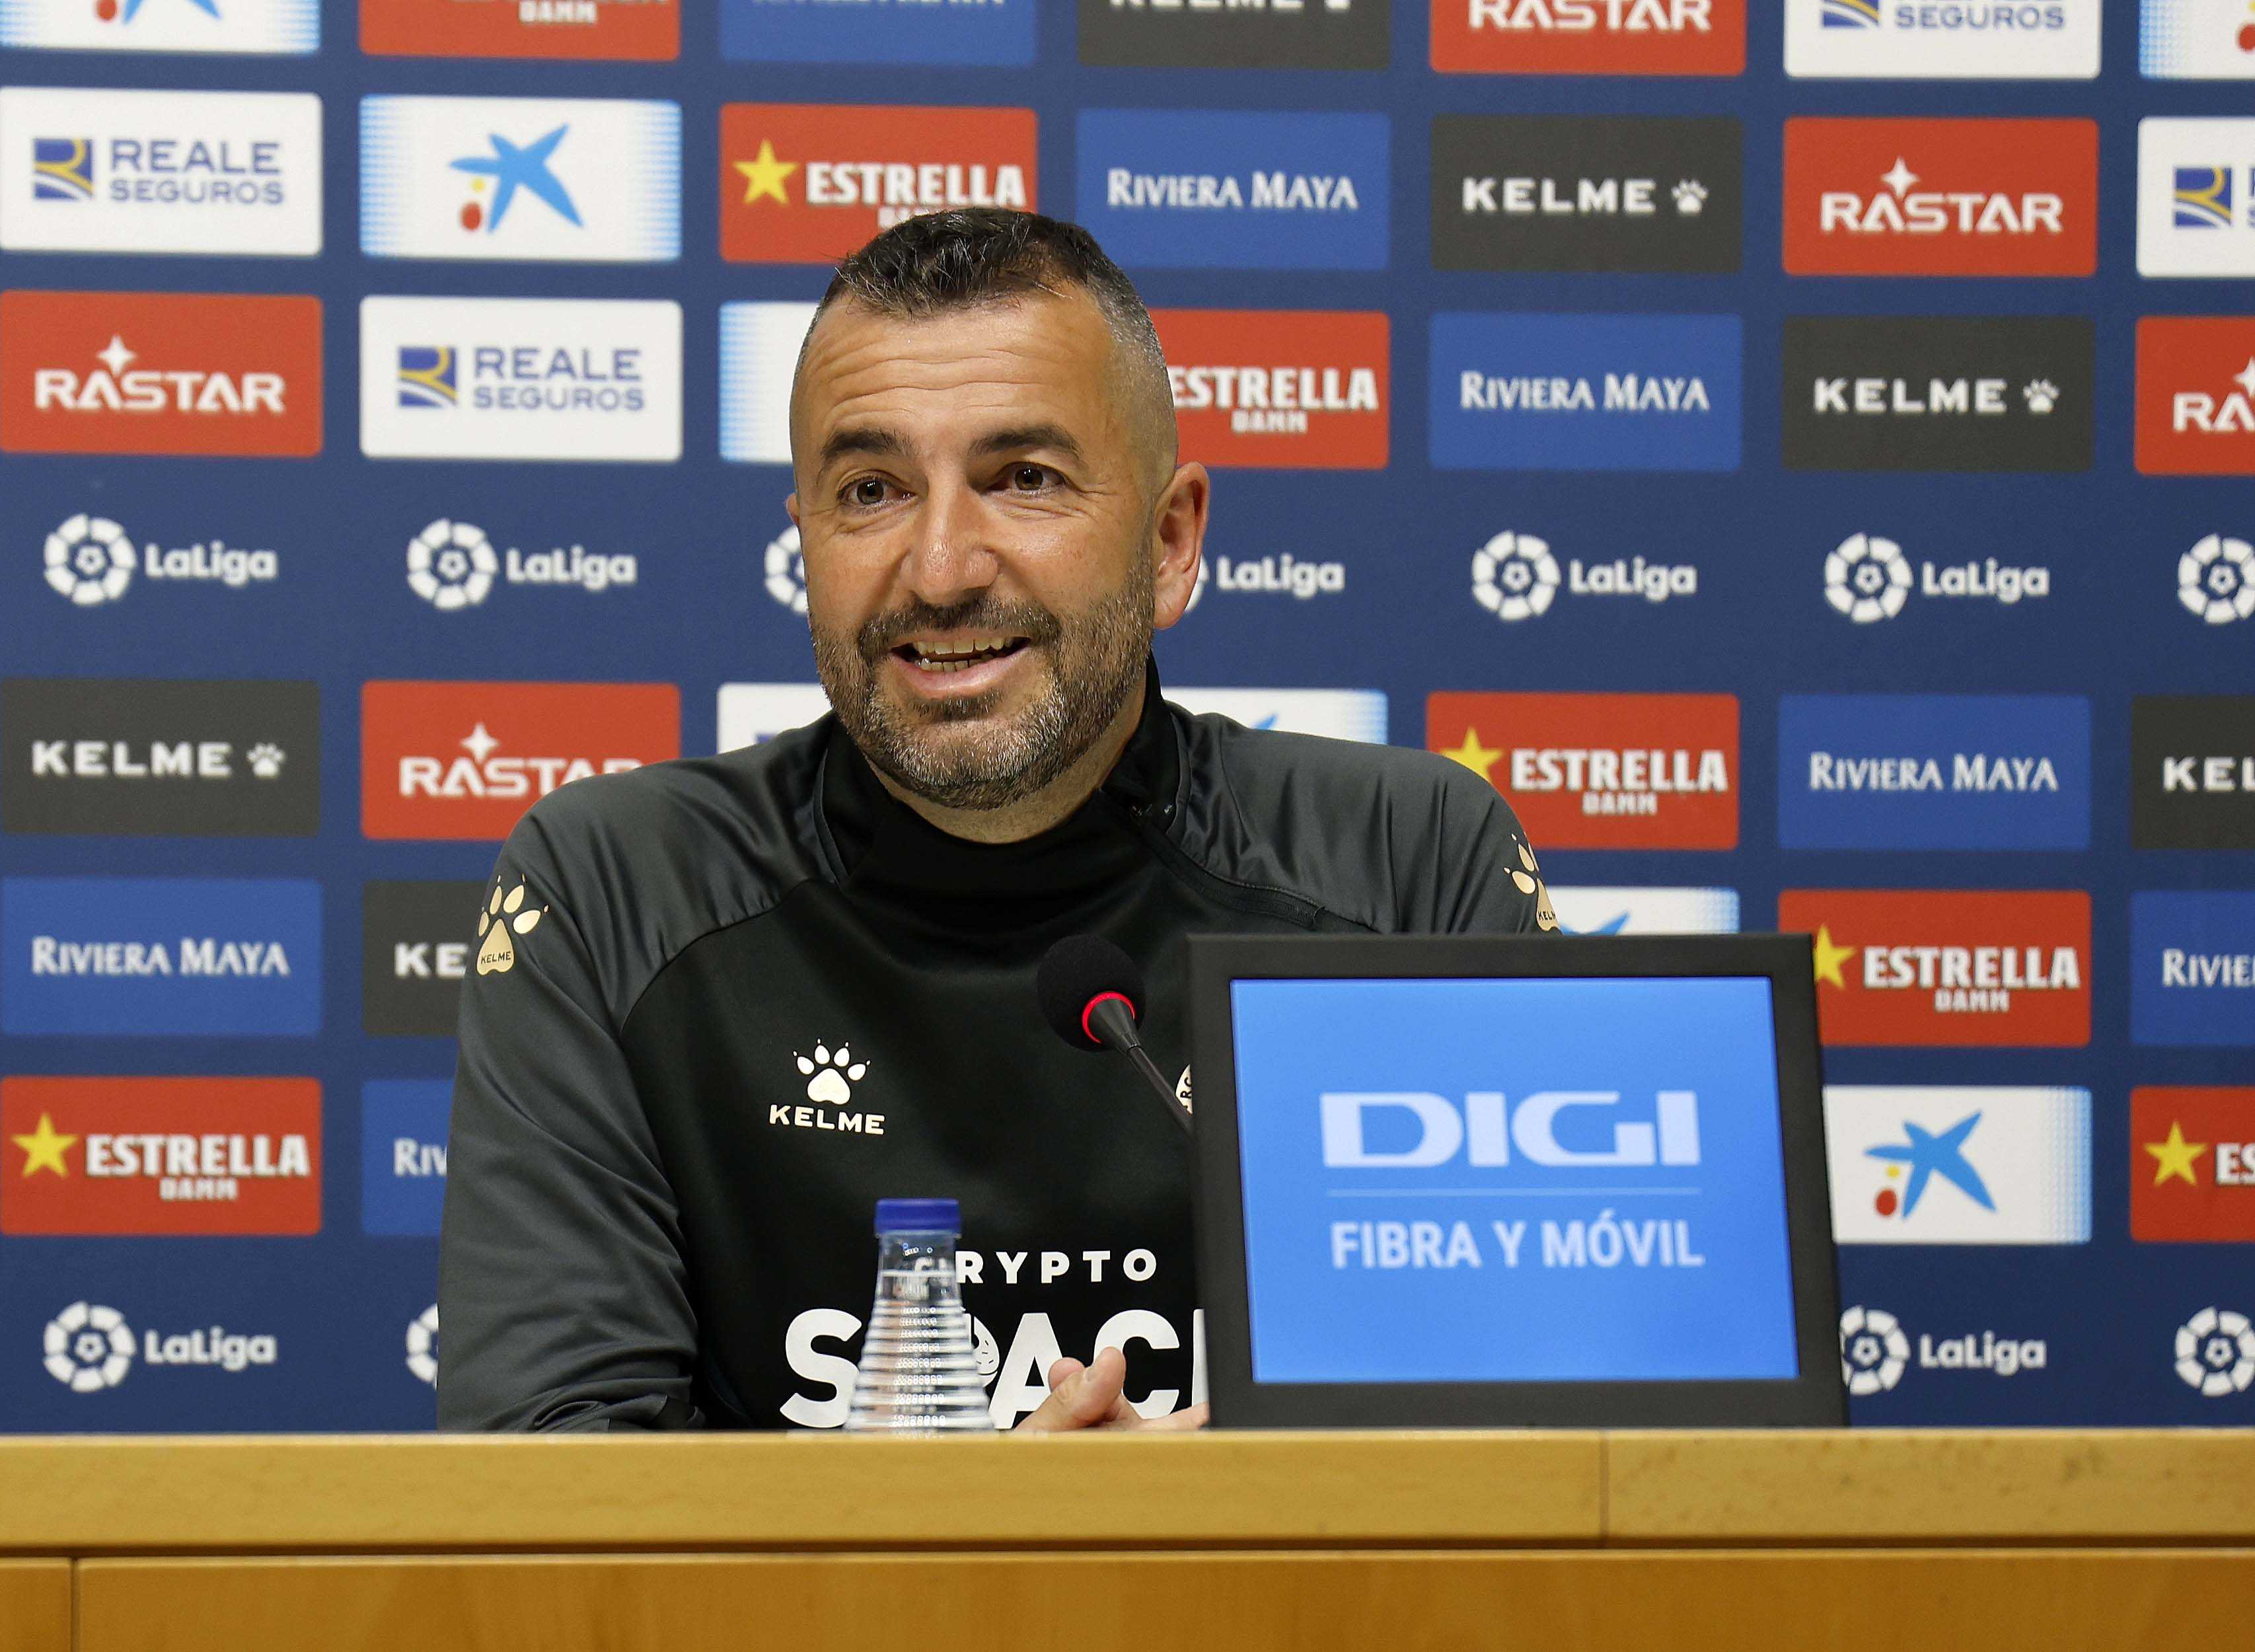 Diego Martínez: “It will be a highly demanding match”